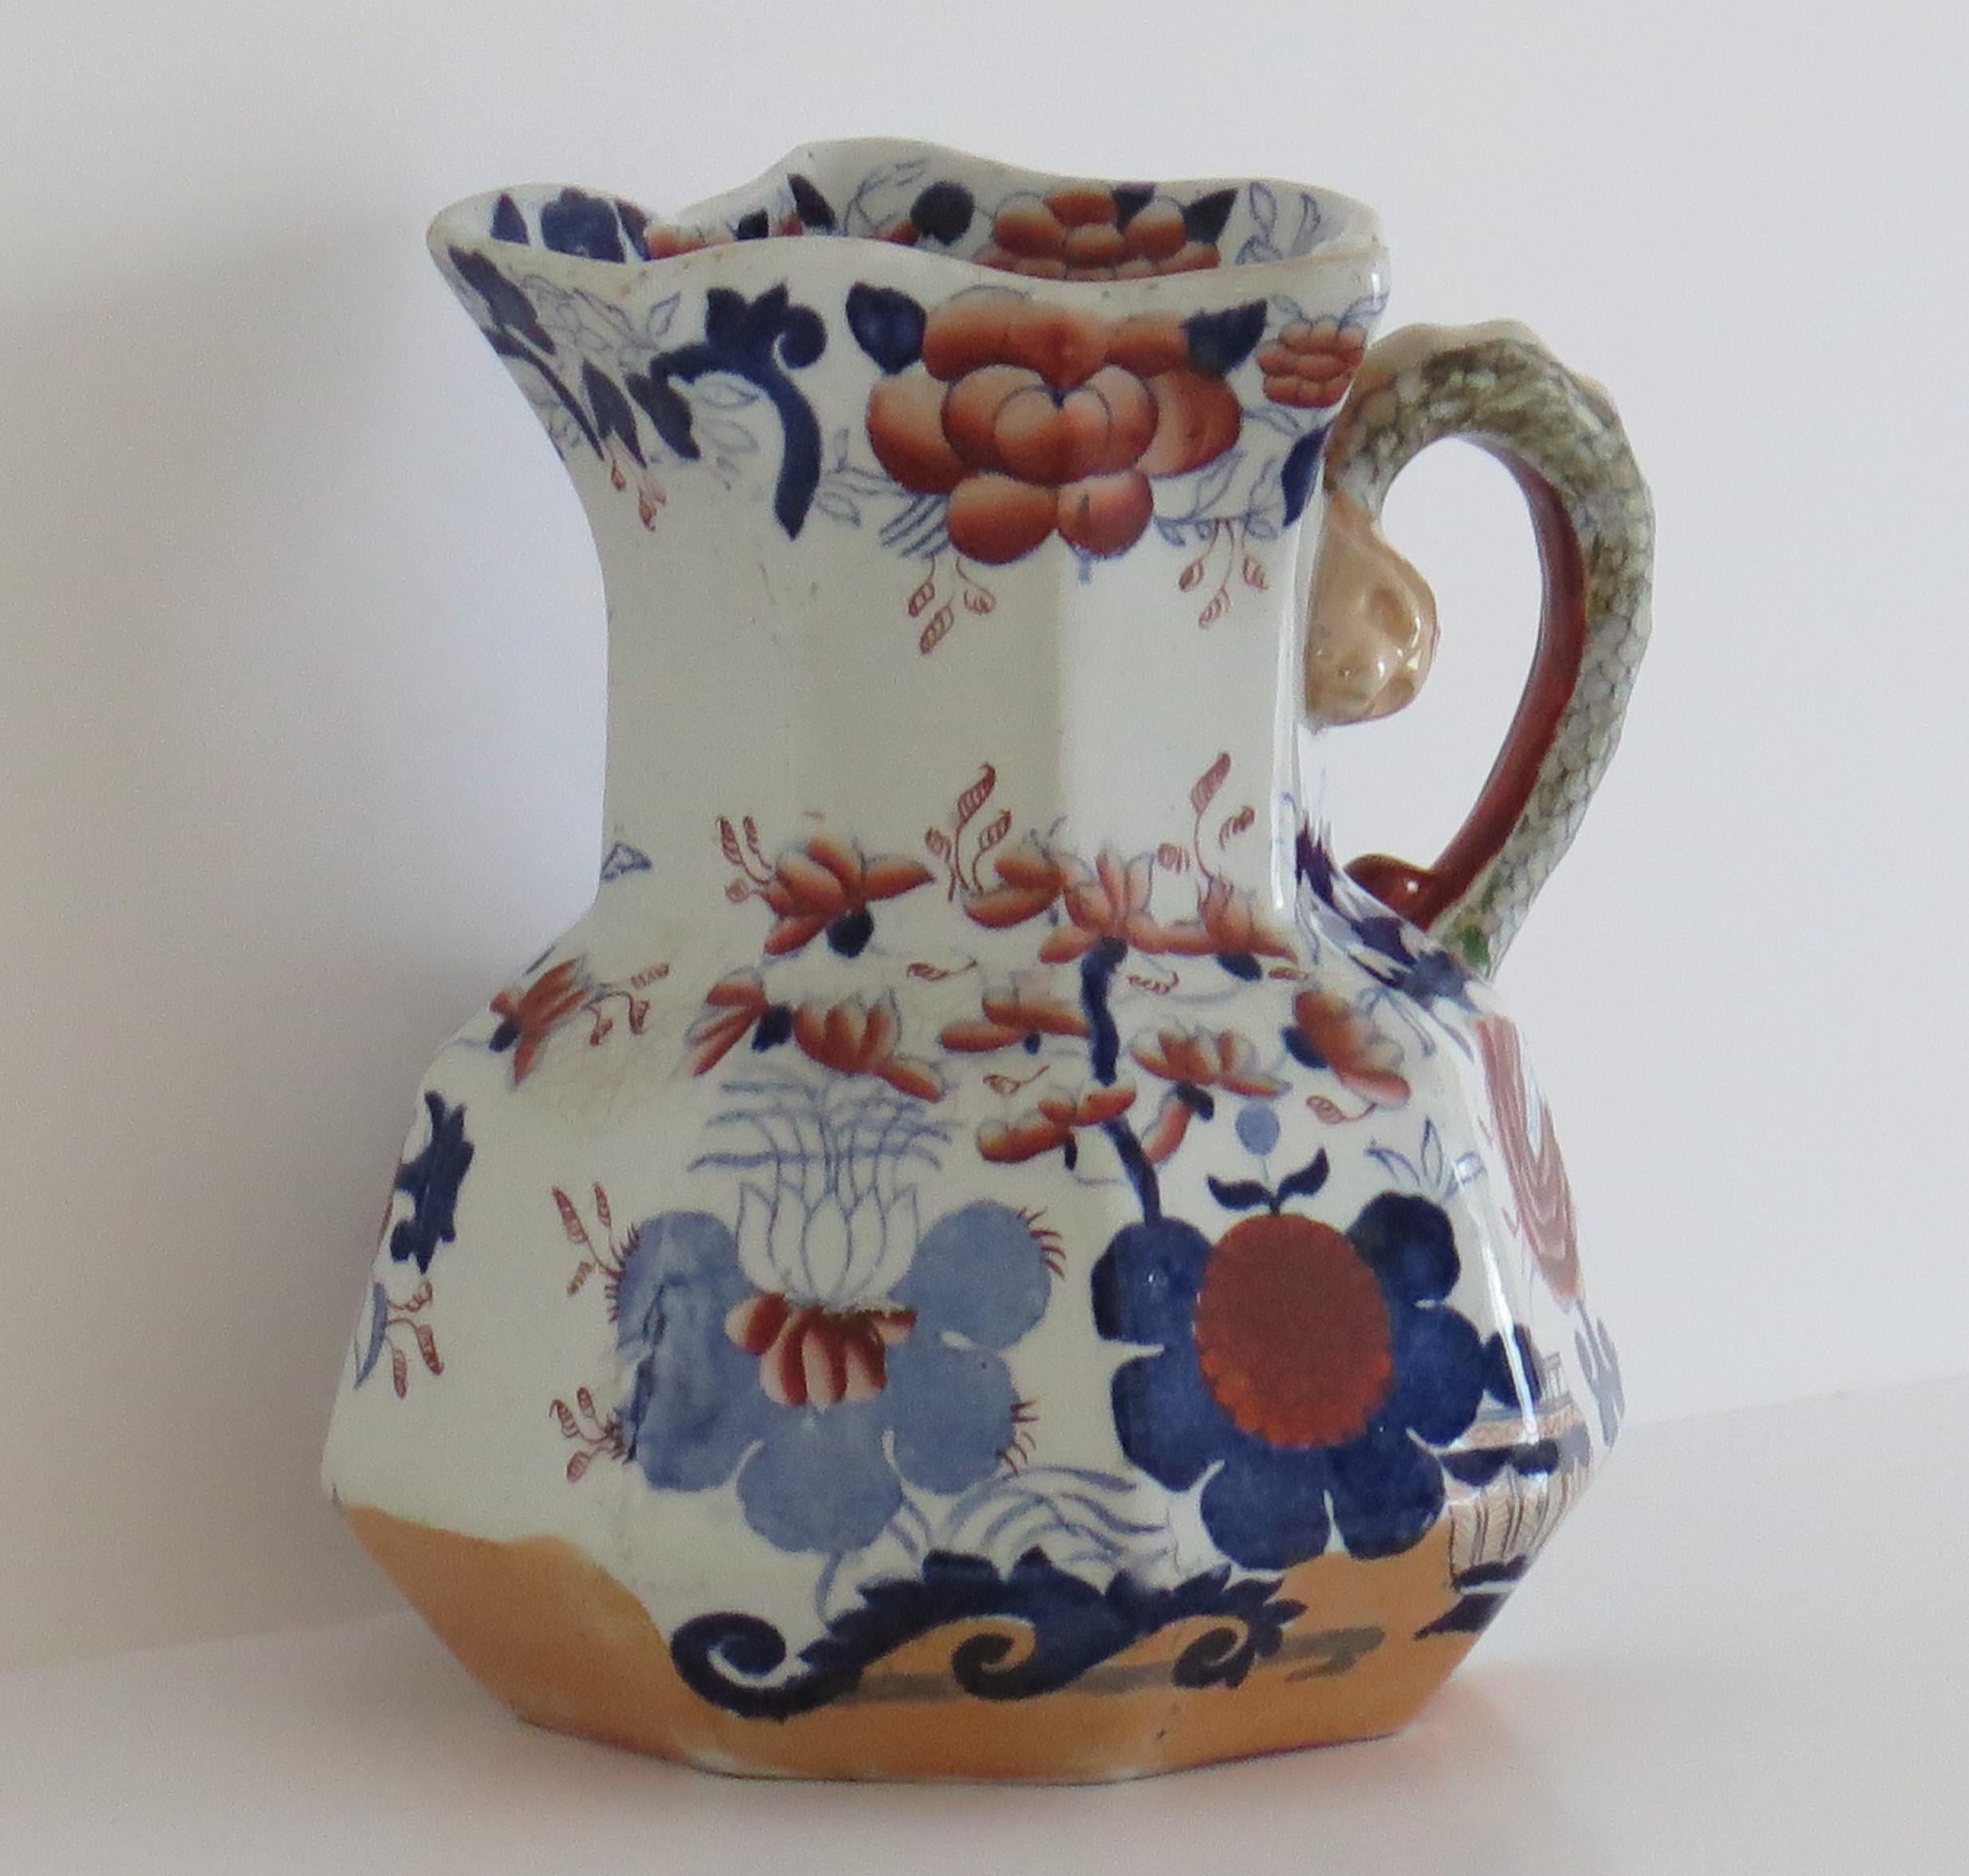 Chinoiserie Very Large Mason's Ironstone Jug or Pitcher Basket Japan Pattern, Circa 1830 For Sale